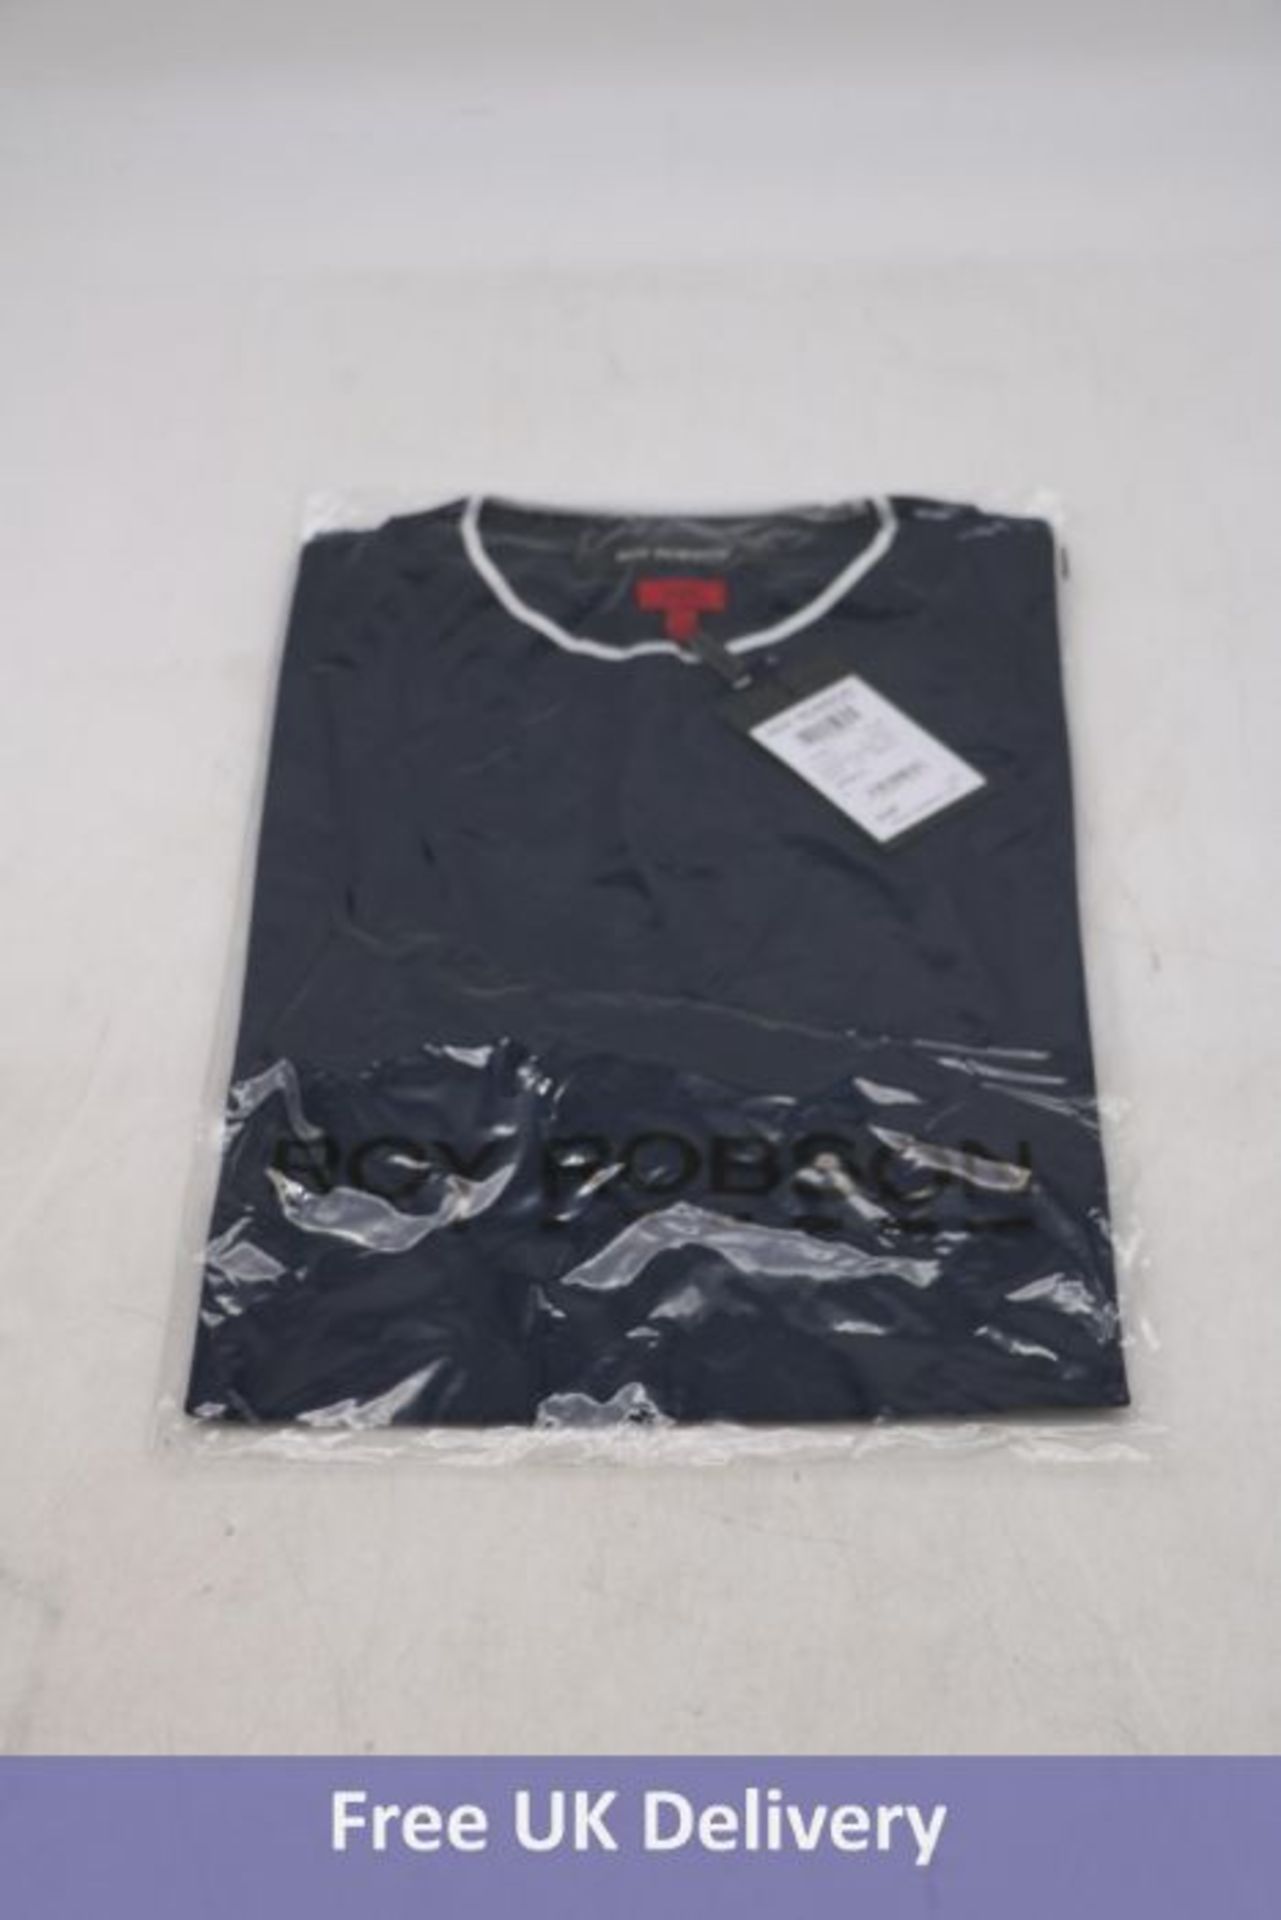 Three Roy Robson Men's Slim Fit T-Shirts, Navy to include 1x 3XL and 2x XXL